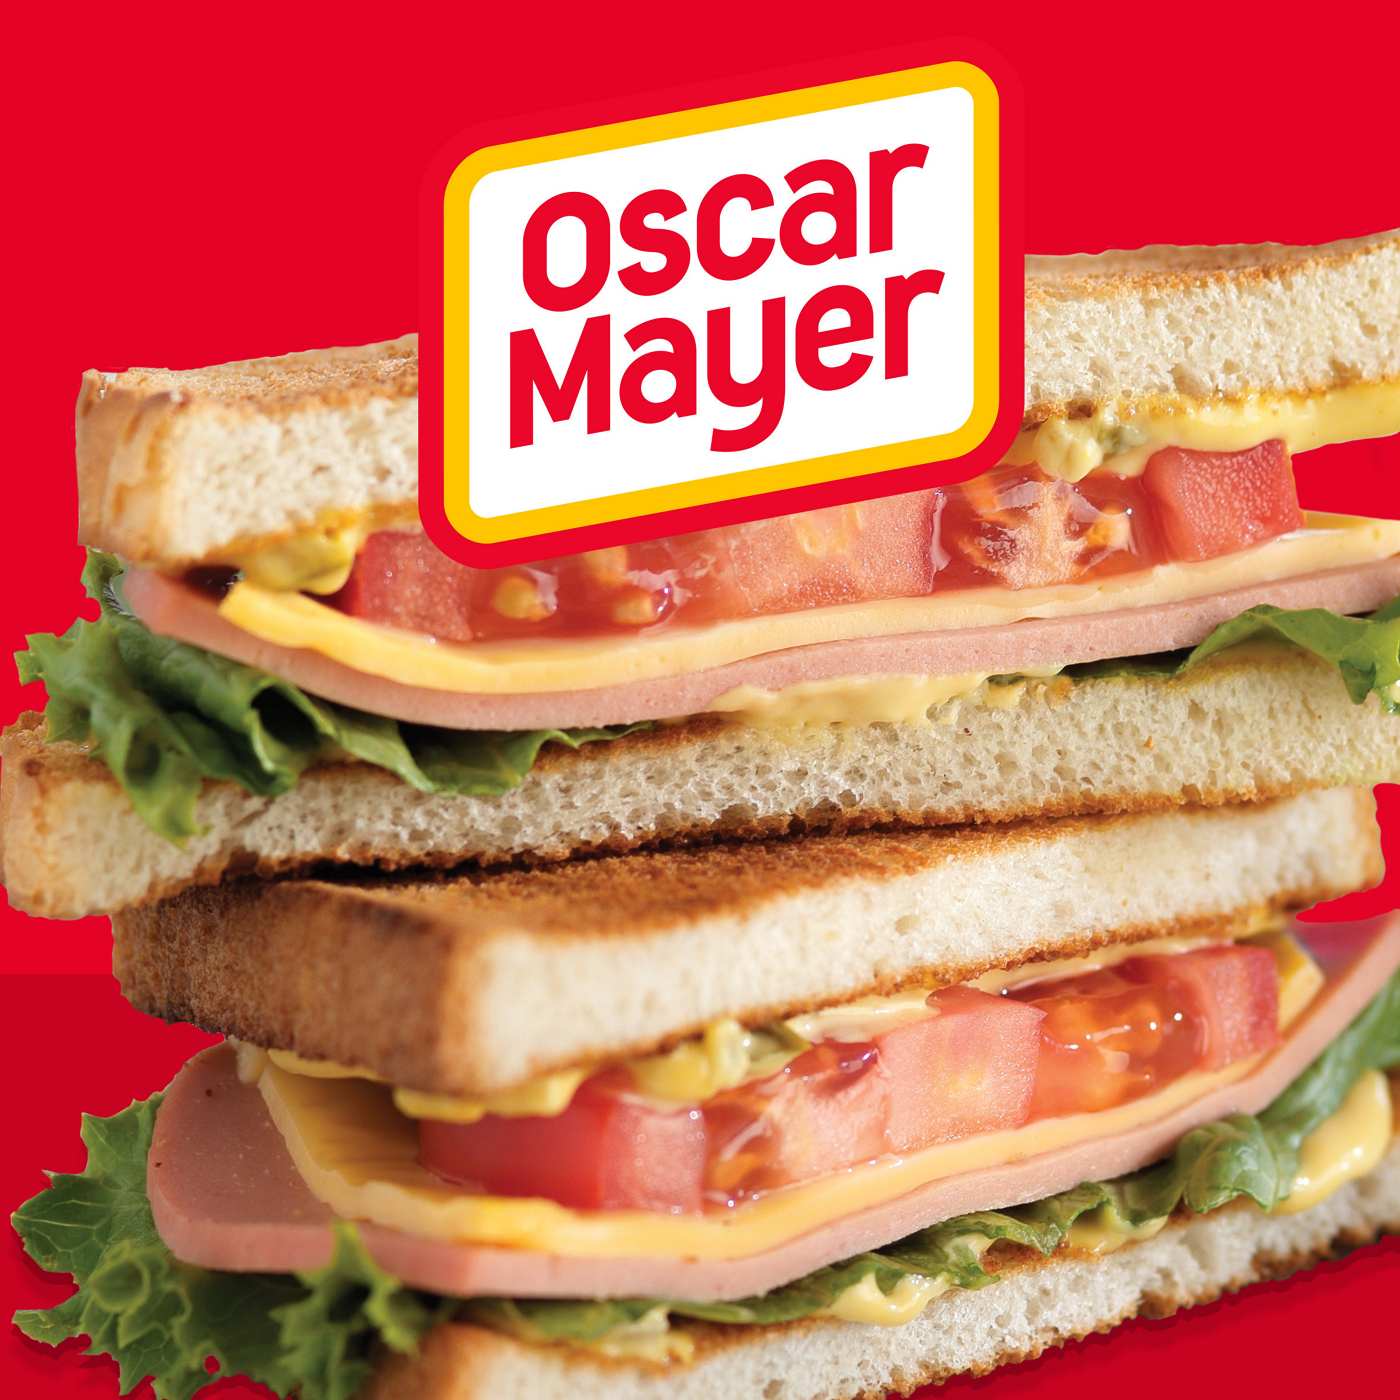 Oscar Mayer Beef Bologna Sliced Lunch Meat; image 2 of 2